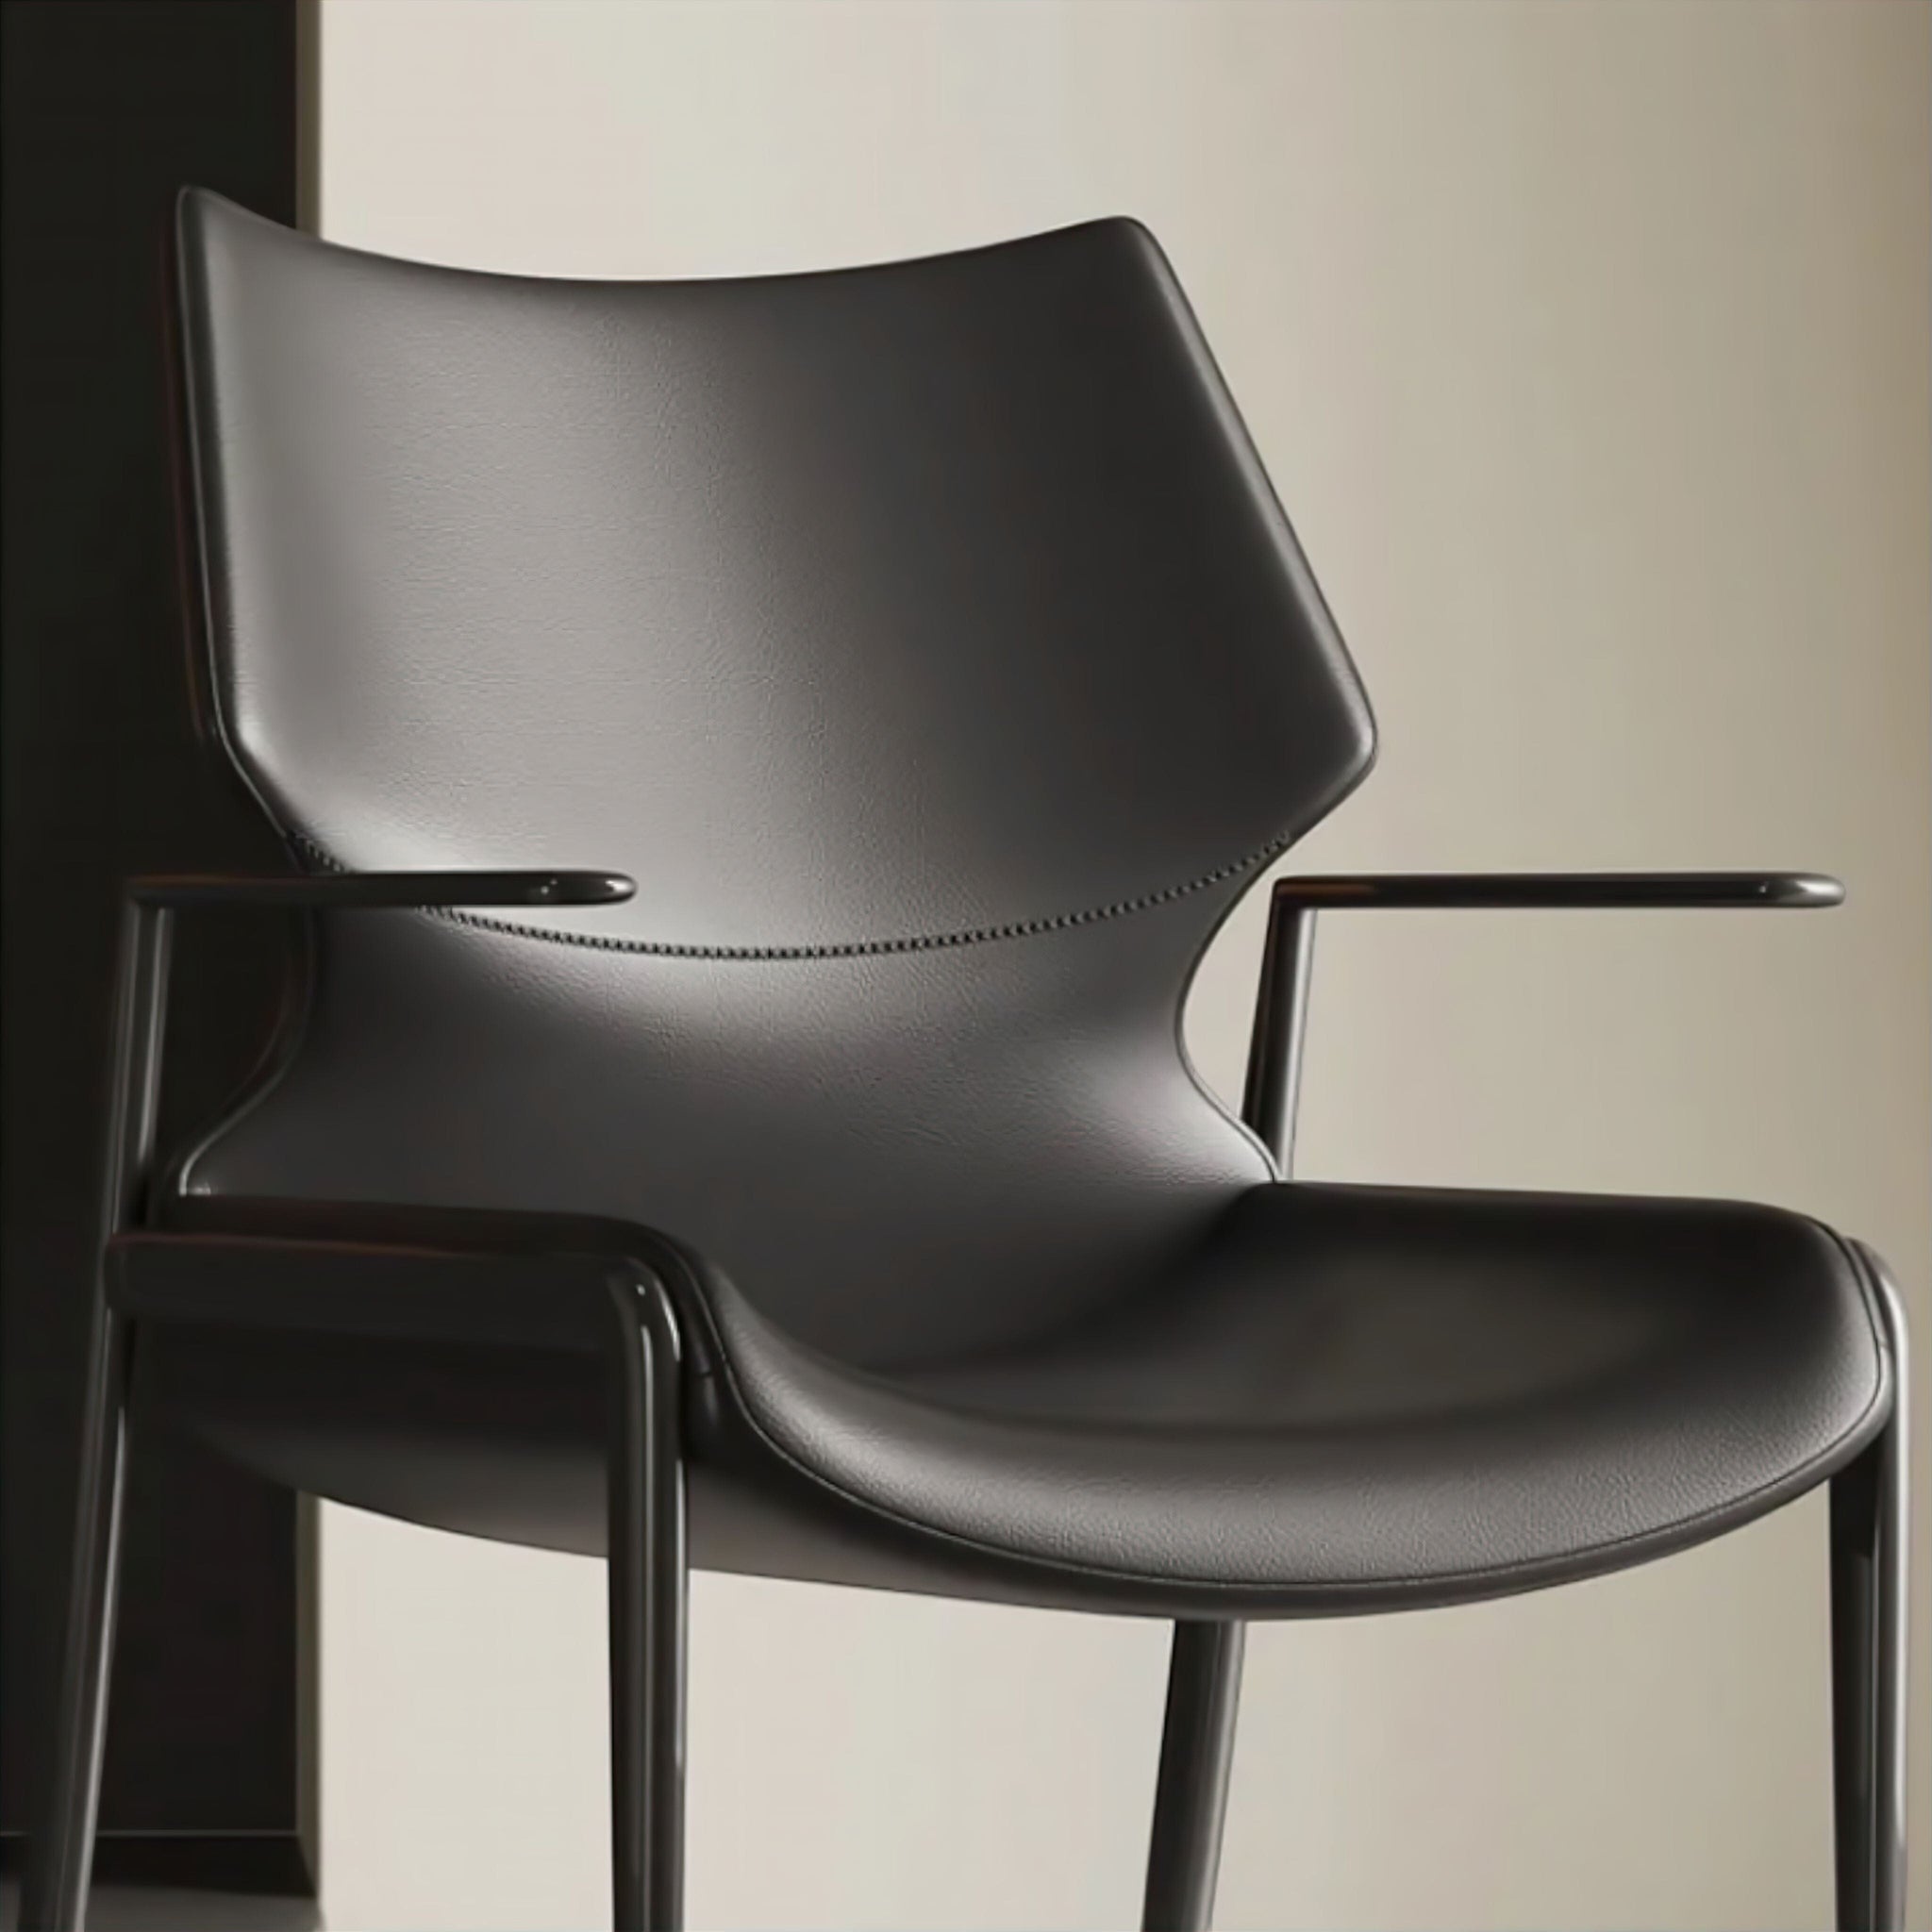 Colette Dining Chairs Chair 